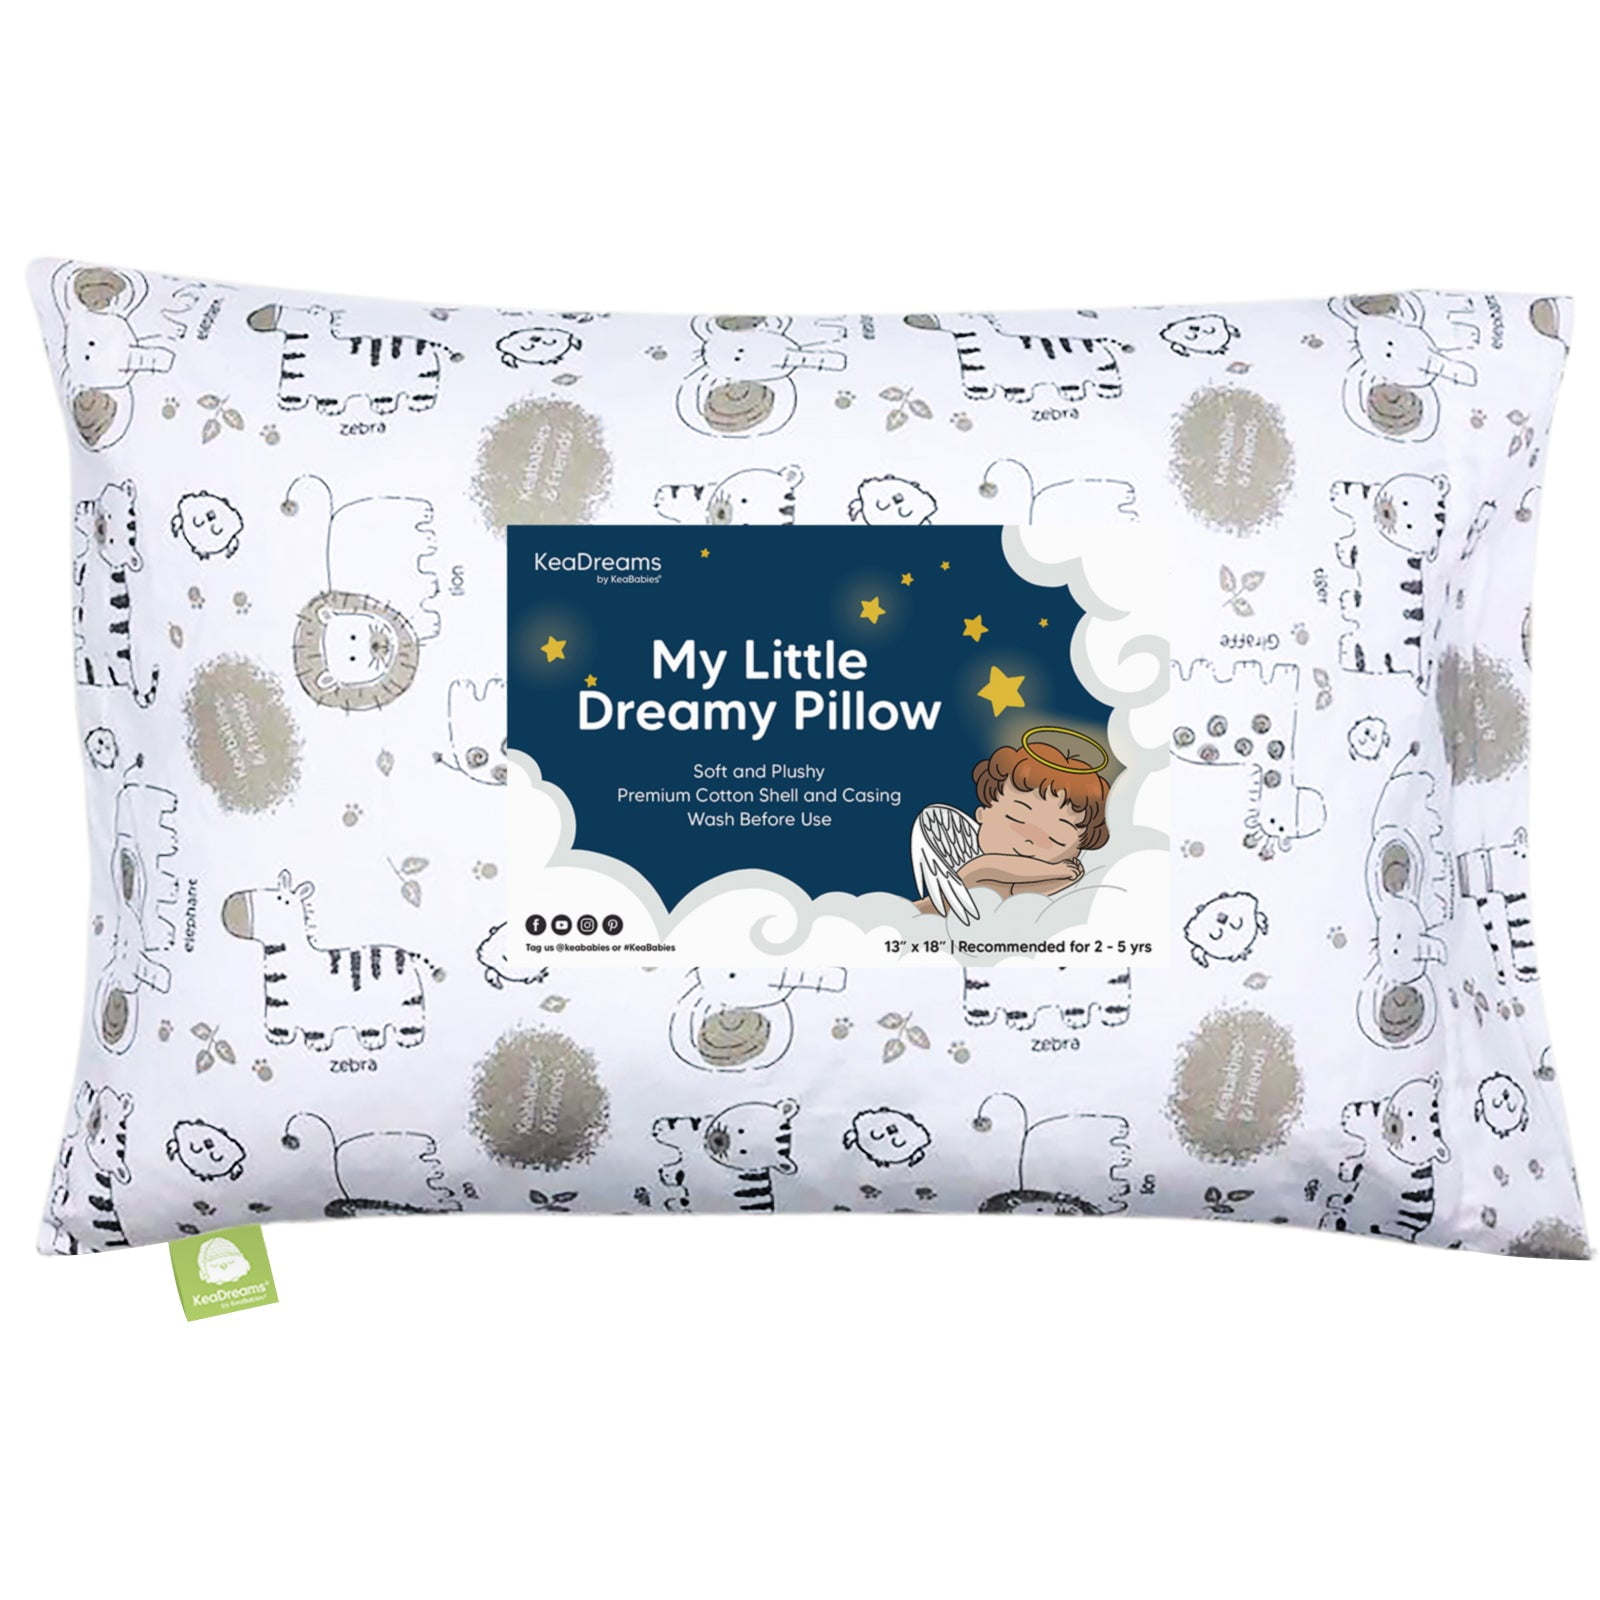 Infant Cute Printed Pillow for Sleeping Toddler Pillow with Soft Organic Cotton Pillowcase Machine Washable Travel Kids Baby Sleeping Pillows for Toddlers 